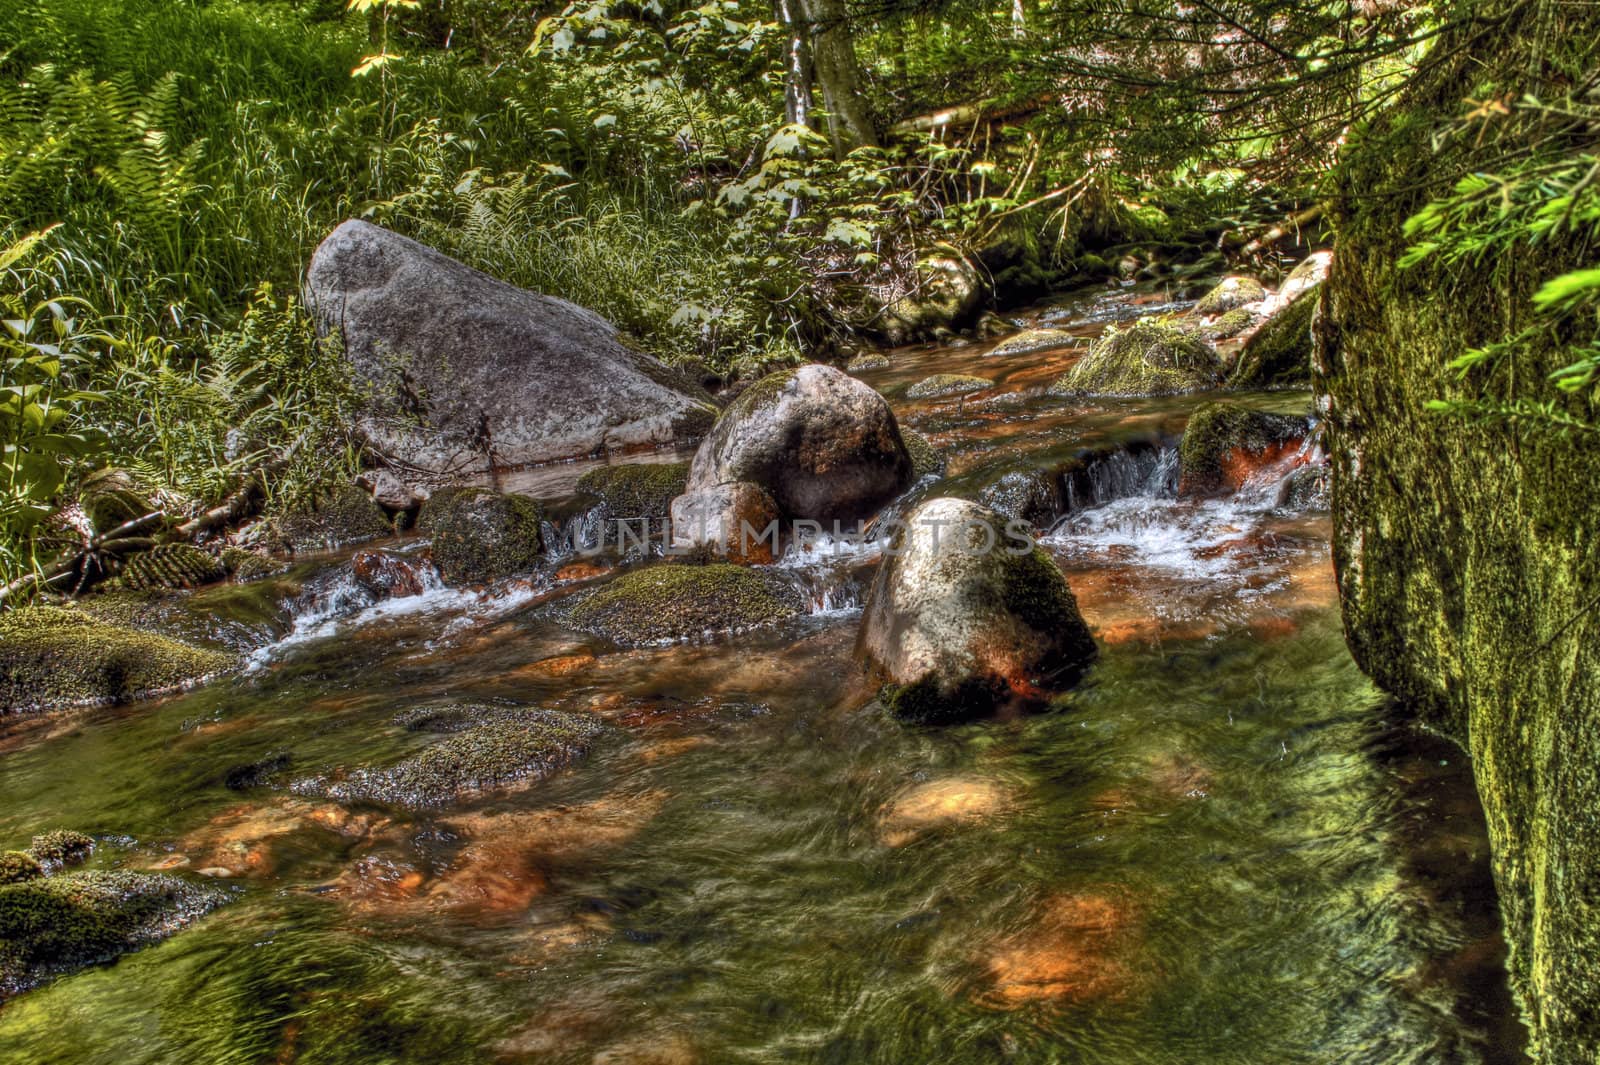 Creek flowing through a forest with rocks and moss